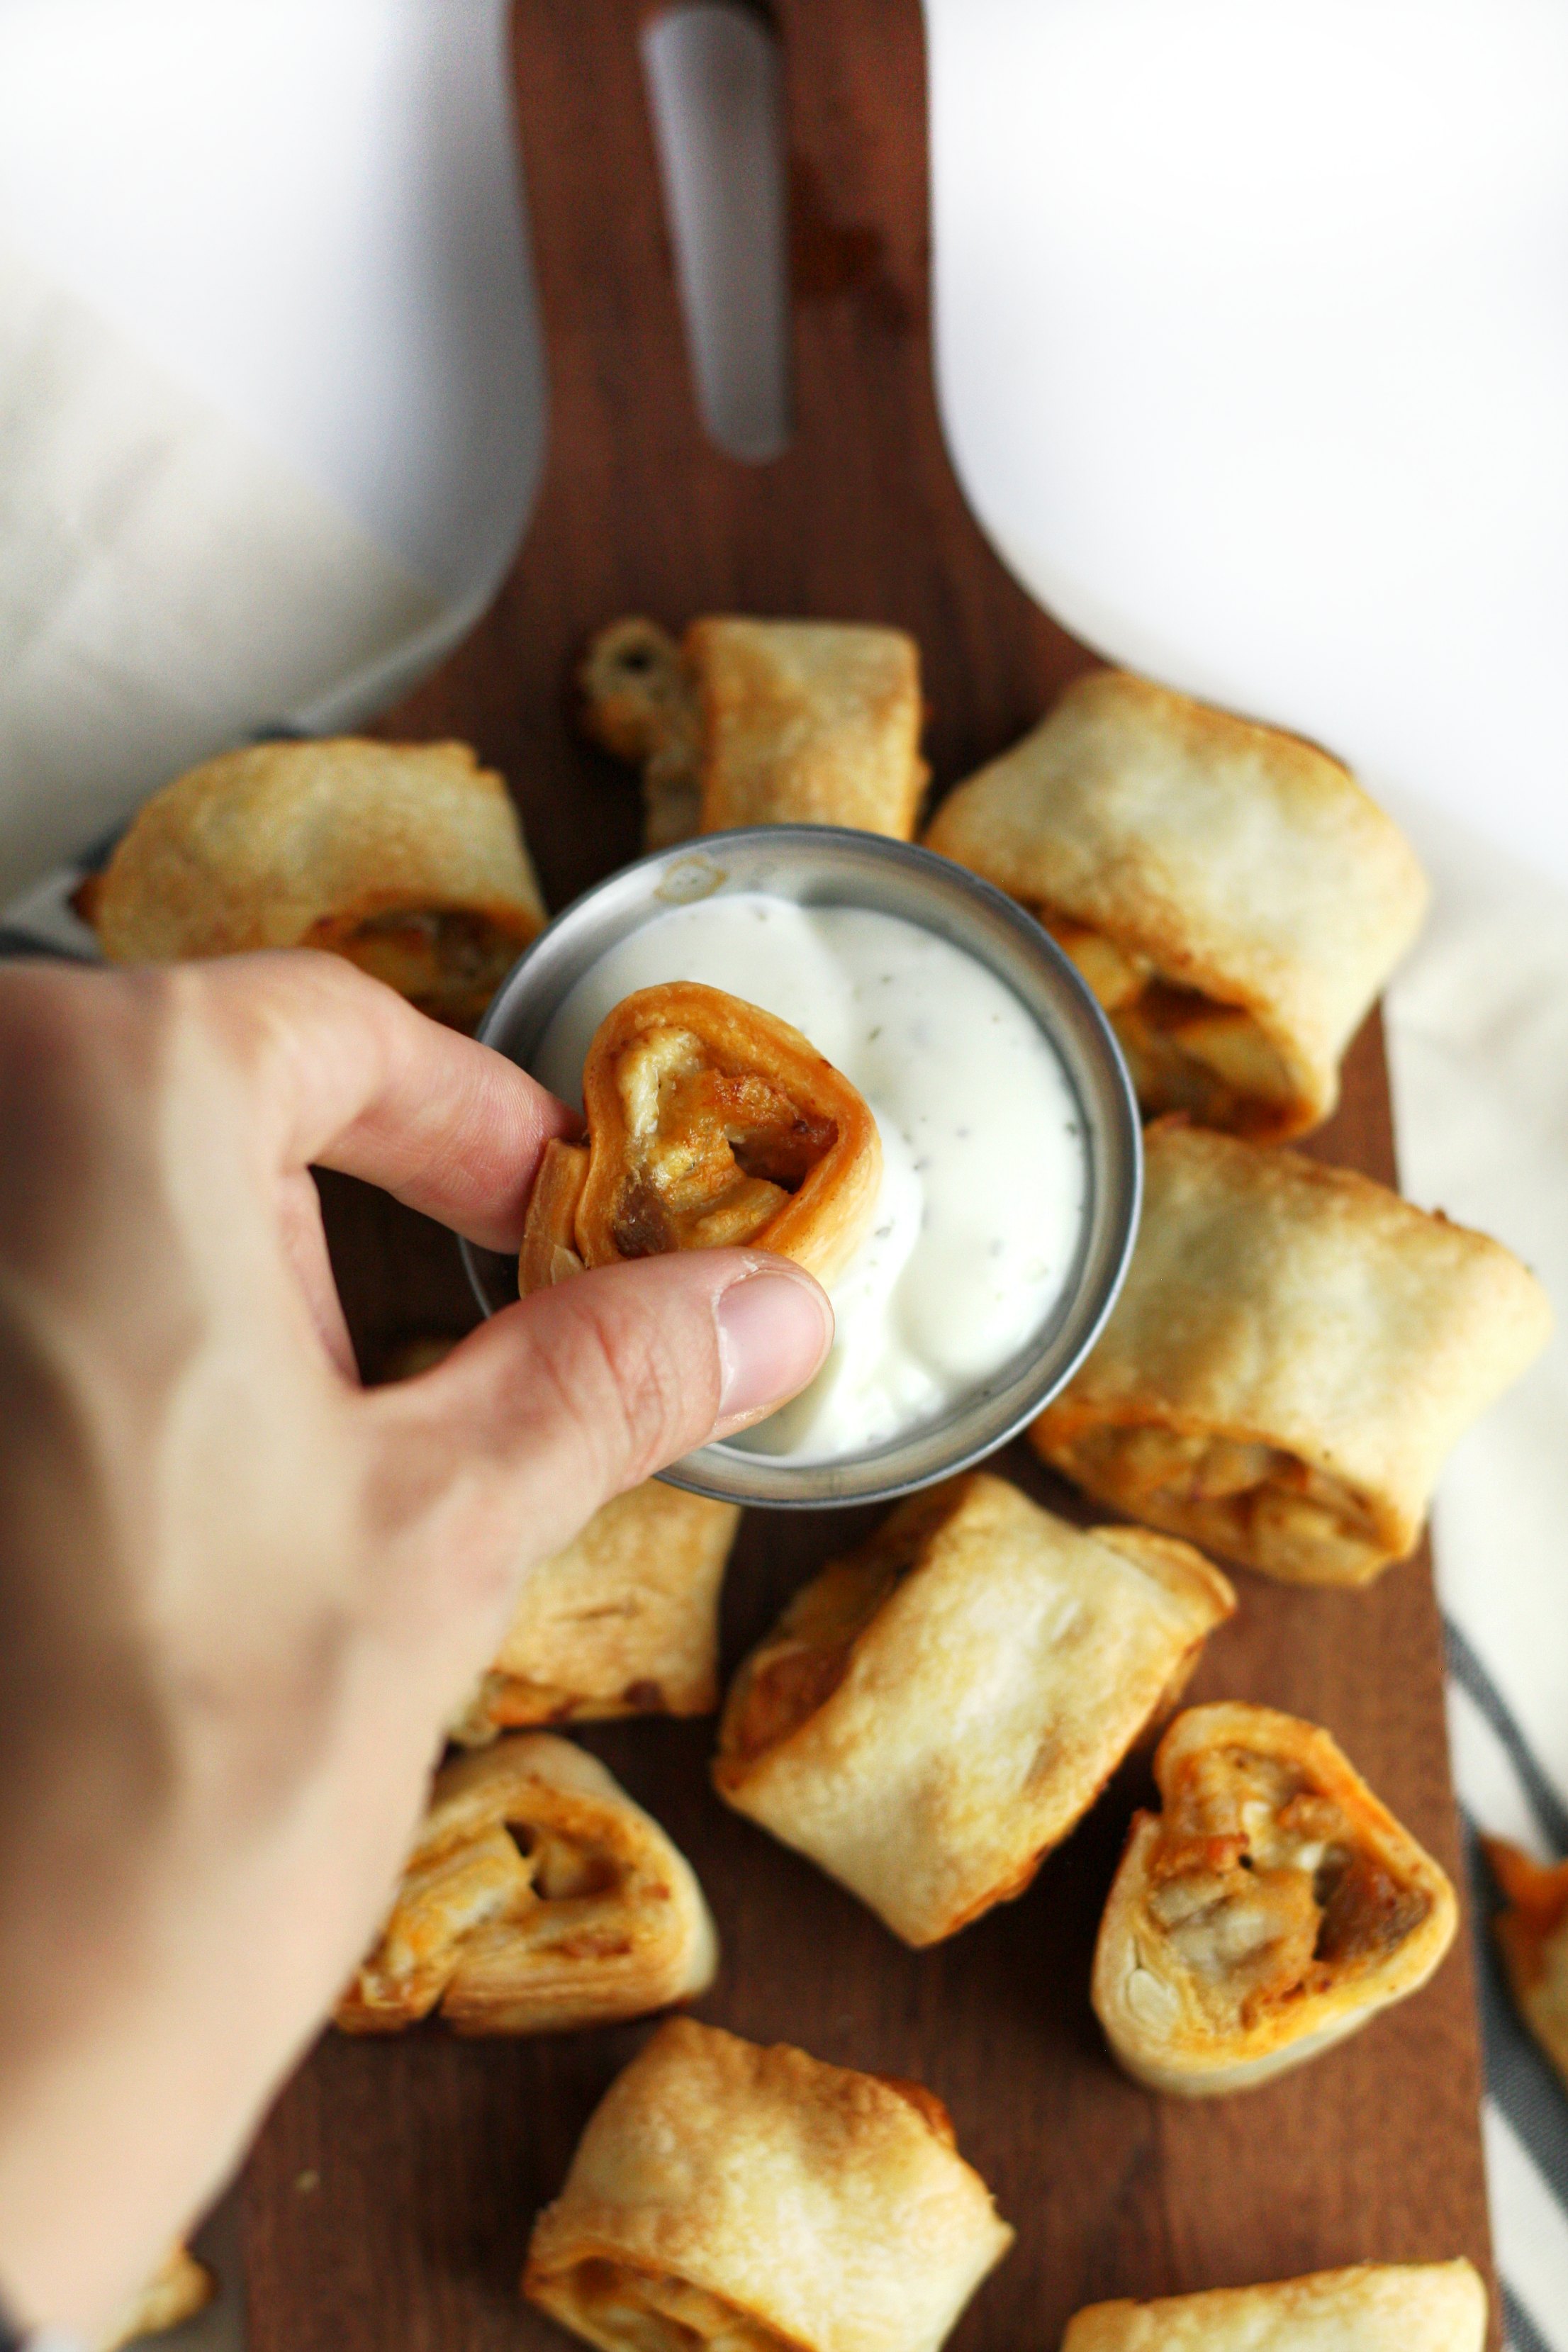 These flavorful Buffalo Chicken Blue Cheese Bites are the perfect party appetizer for entertaining. Whether you’re hosting a tailgate party or happy hour at home, these budget-friendly small bites need to be on the menu.